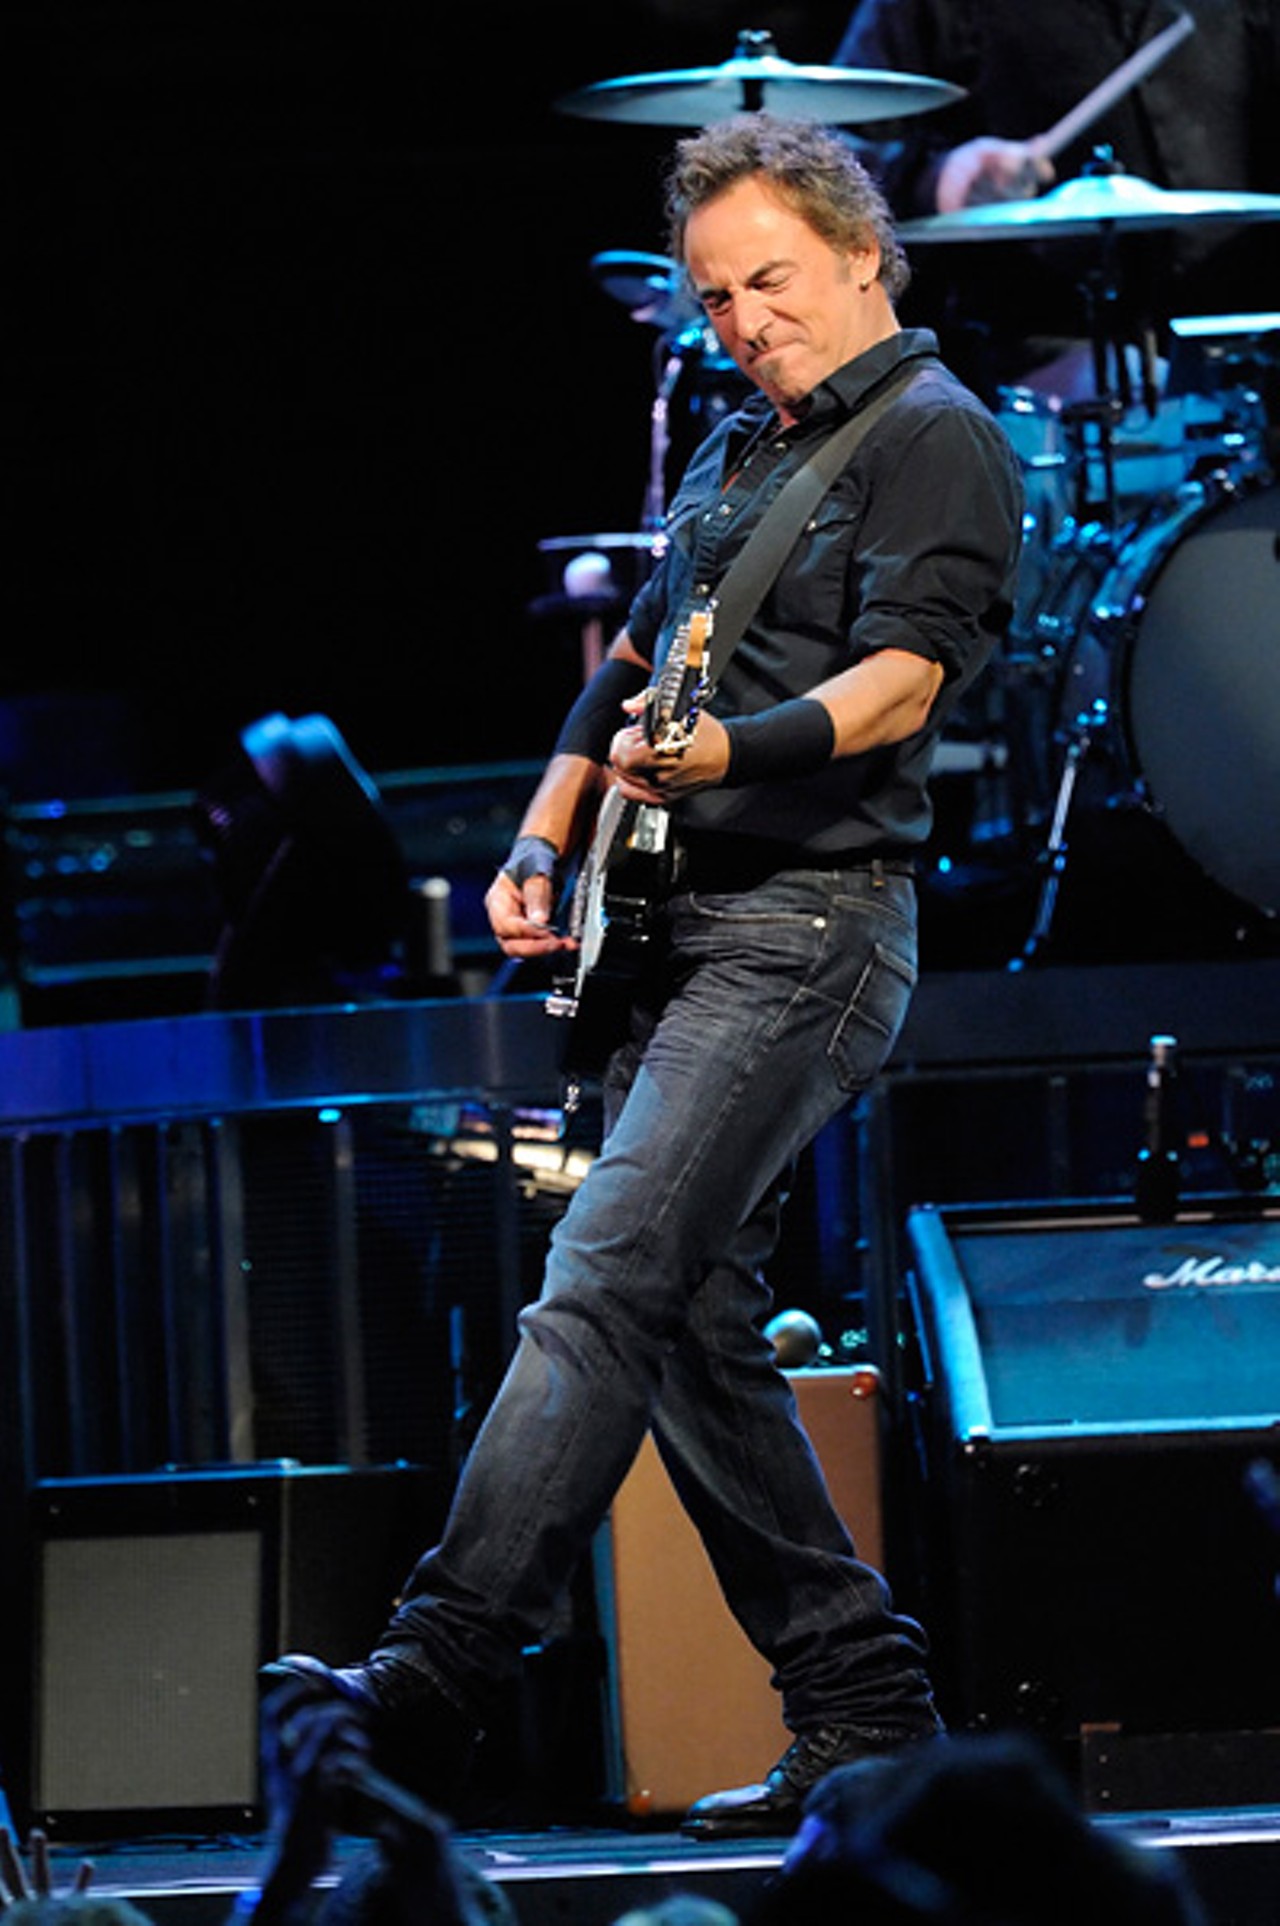 Bruce Springsteen, performing at the Scottrade Center in St. Louis, August 23, 2008. Read a review of show.